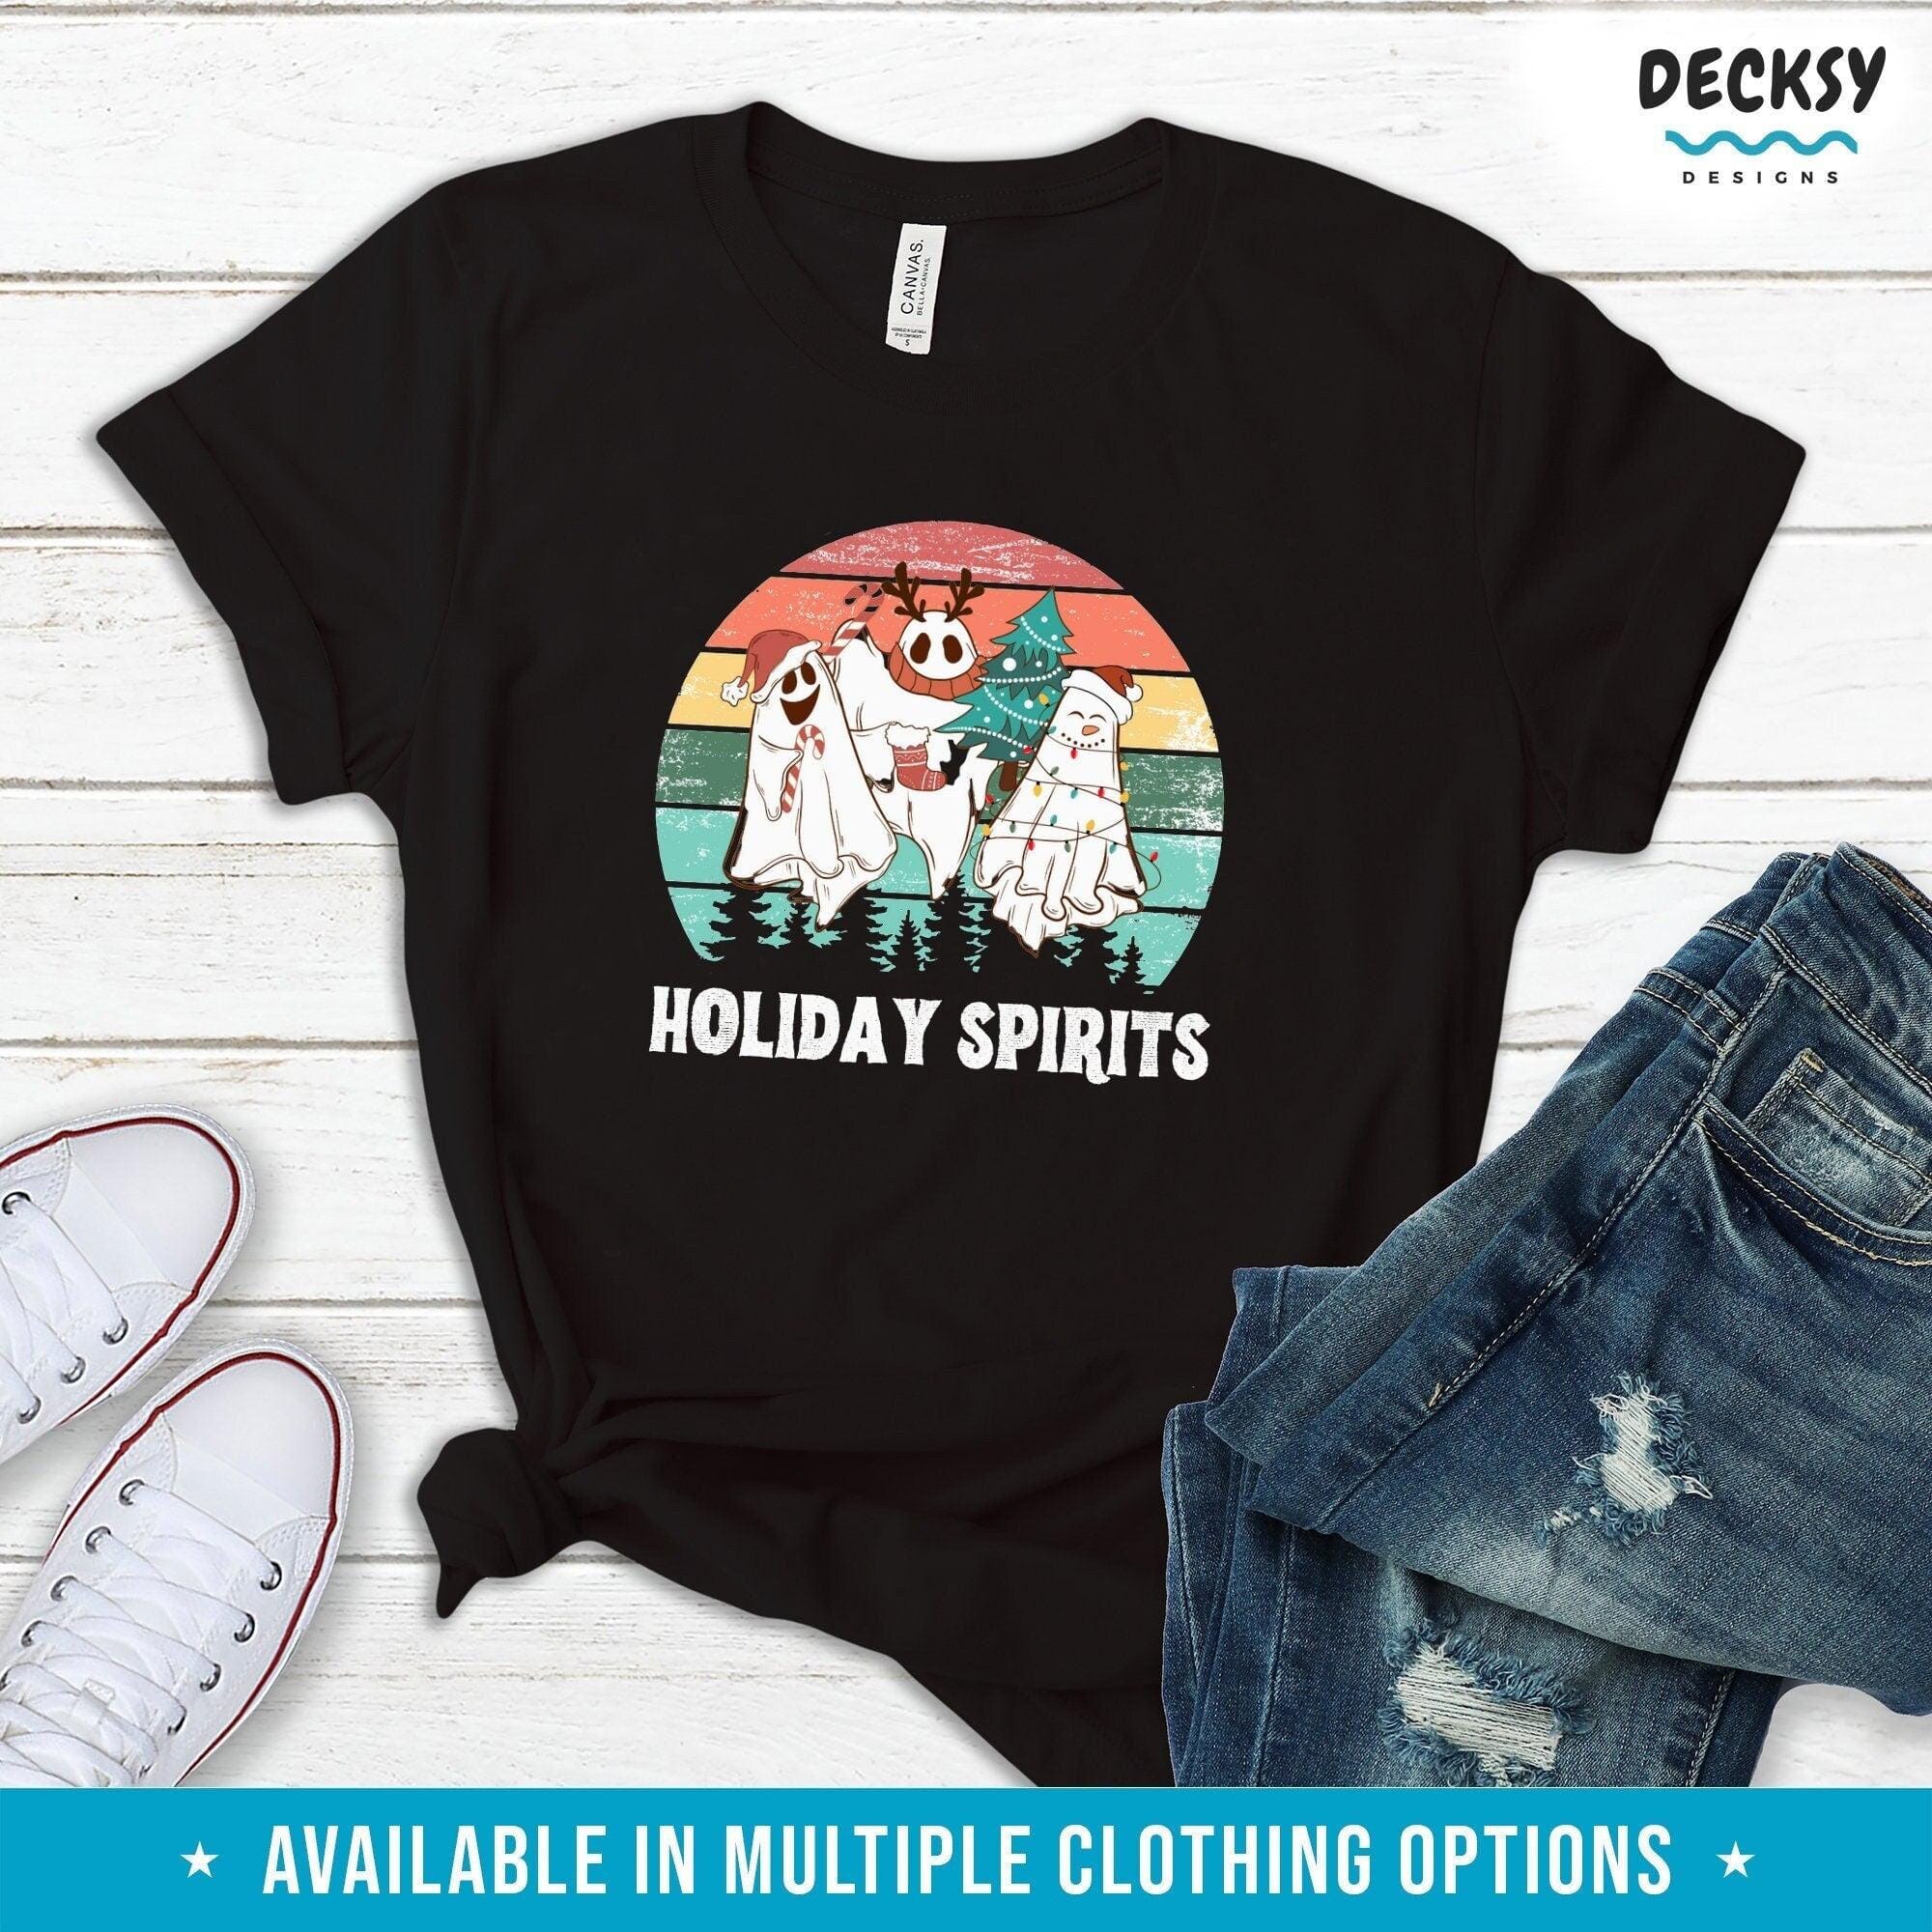 Spooky Christmas Shirt, Ghost Santa Gift-Clothing:Gender-Neutral Adult Clothing:Tops & Tees:T-shirts:Graphic Tees-DecksyDesigns